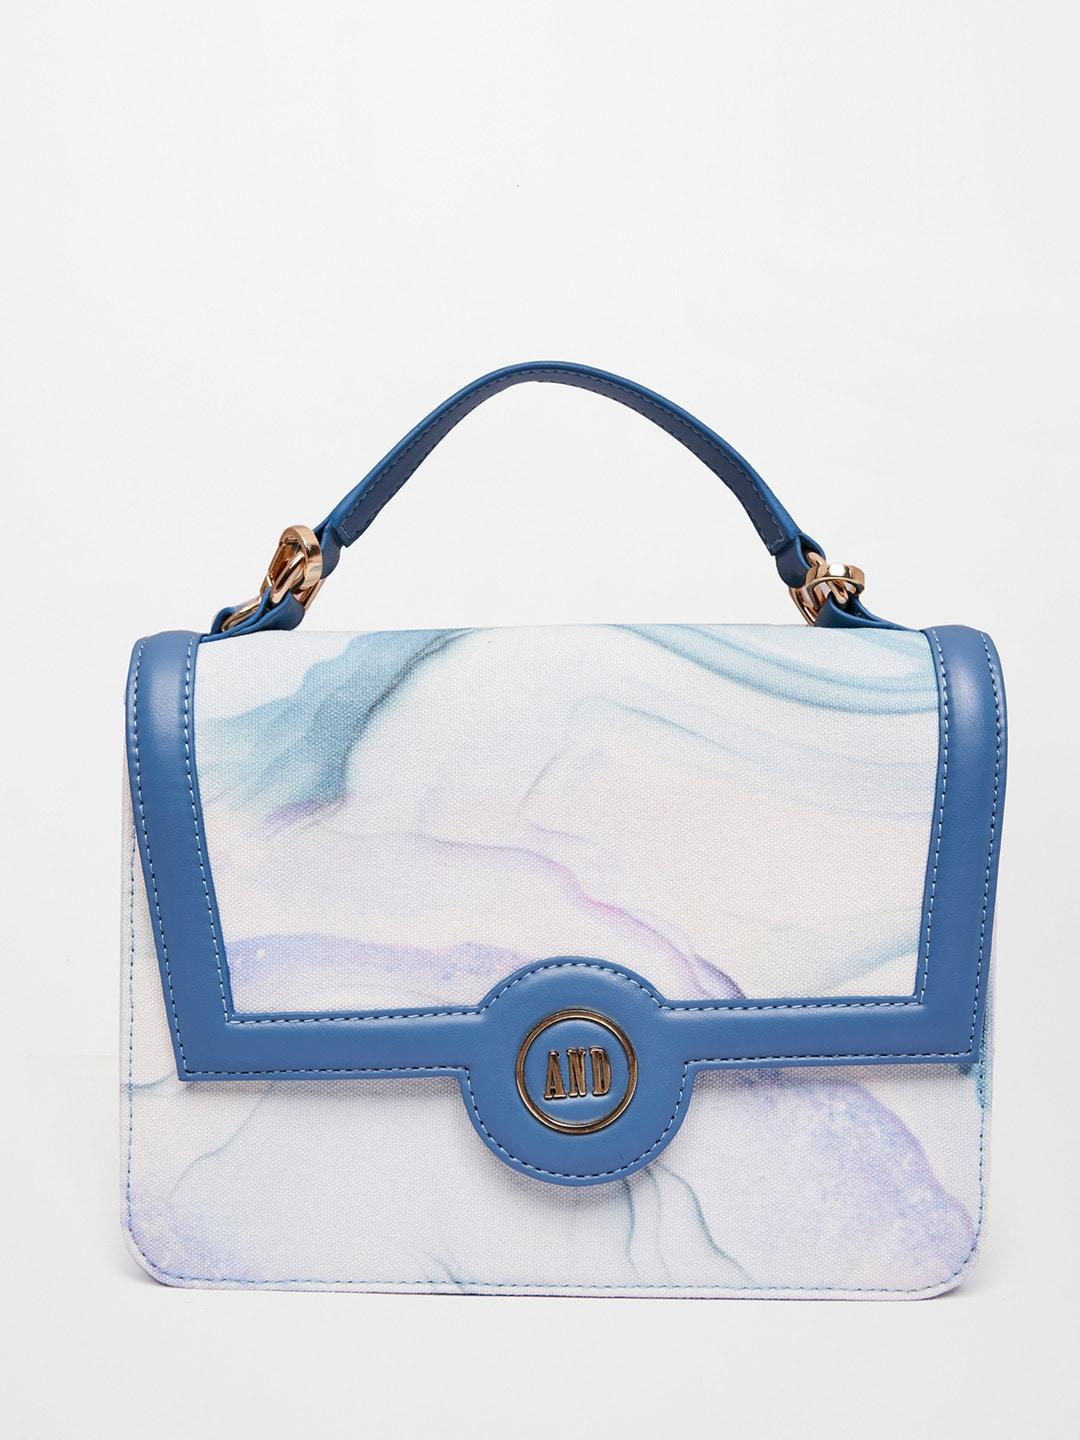 AND Blue Oversized Structured Handheld Bag